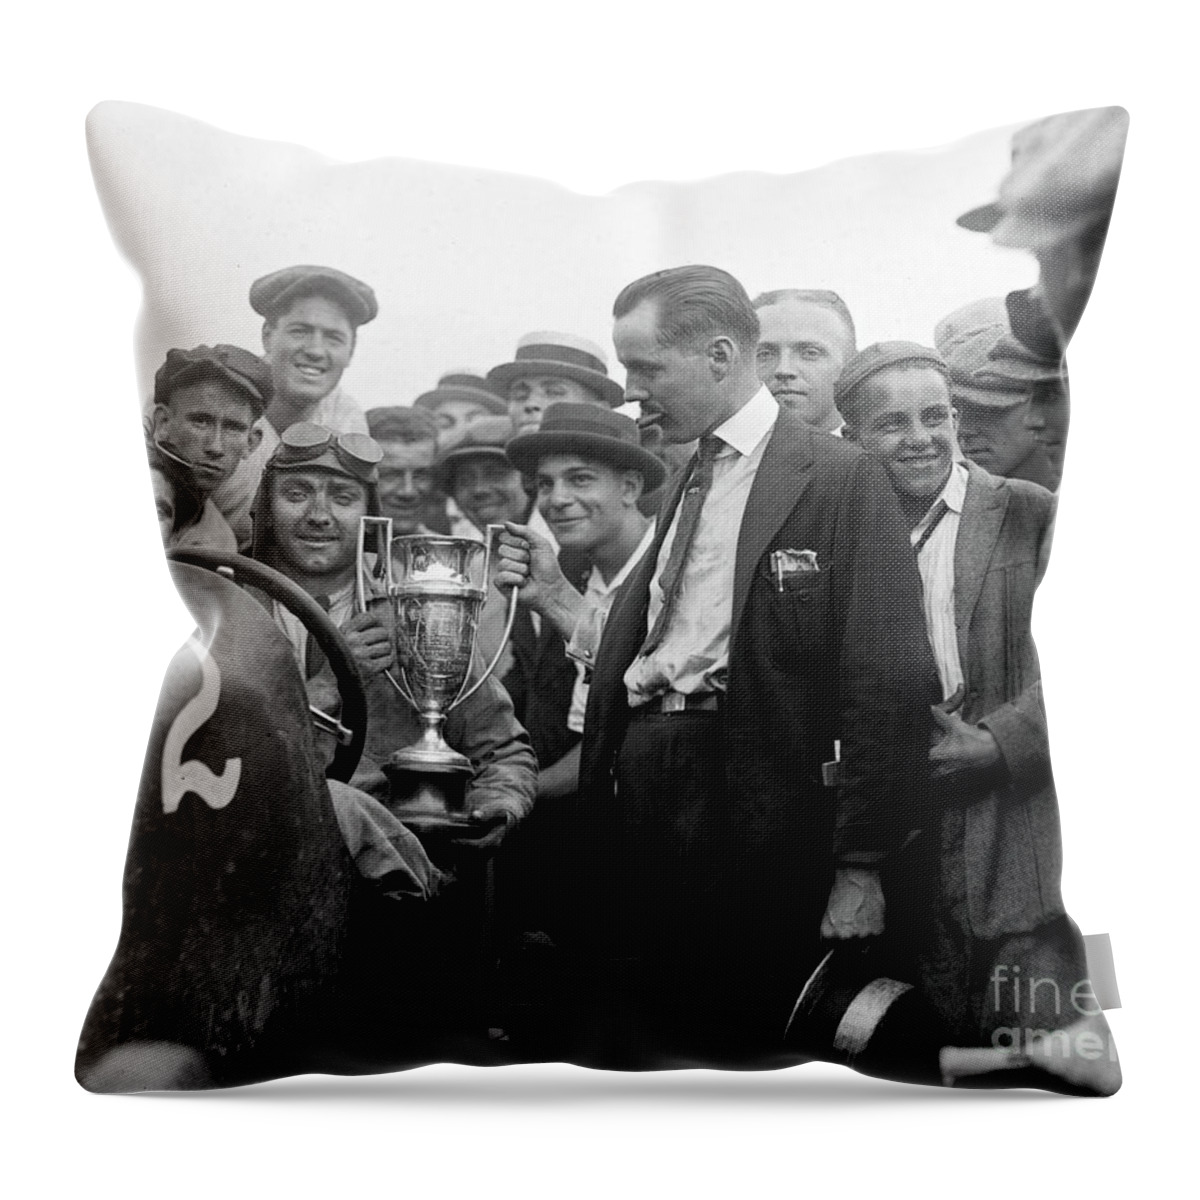 Vintage Throw Pillow featuring the photograph 1920s, Race Winner In Duesenberg With Trophy Cup by Retrographs